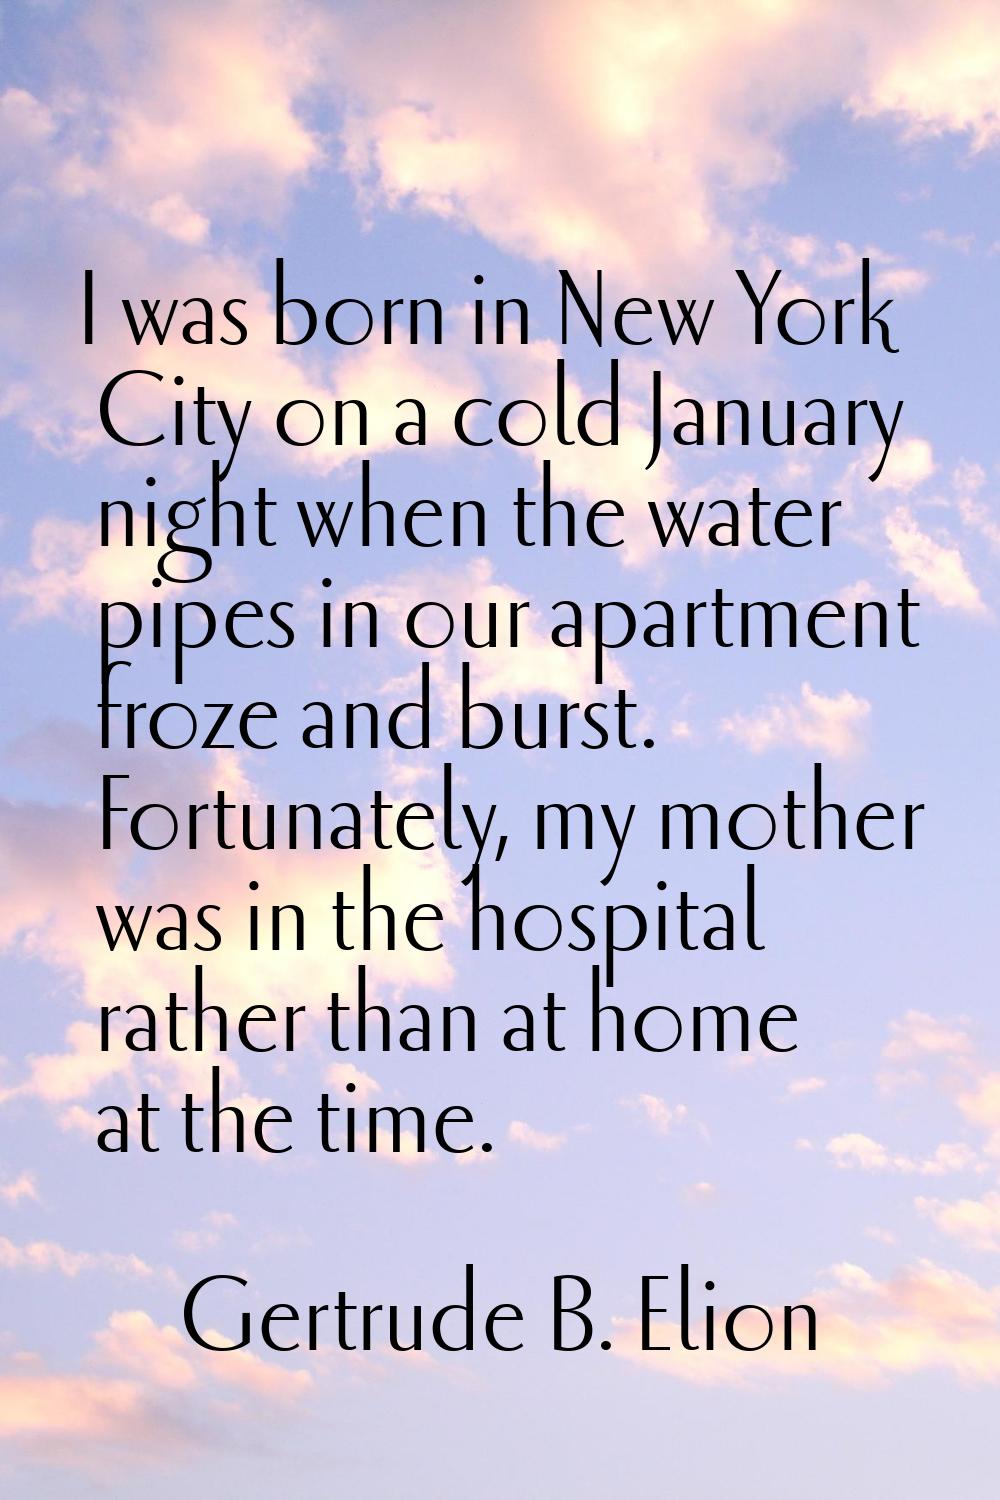 I was born in New York City on a cold January night when the water pipes in our apartment froze and